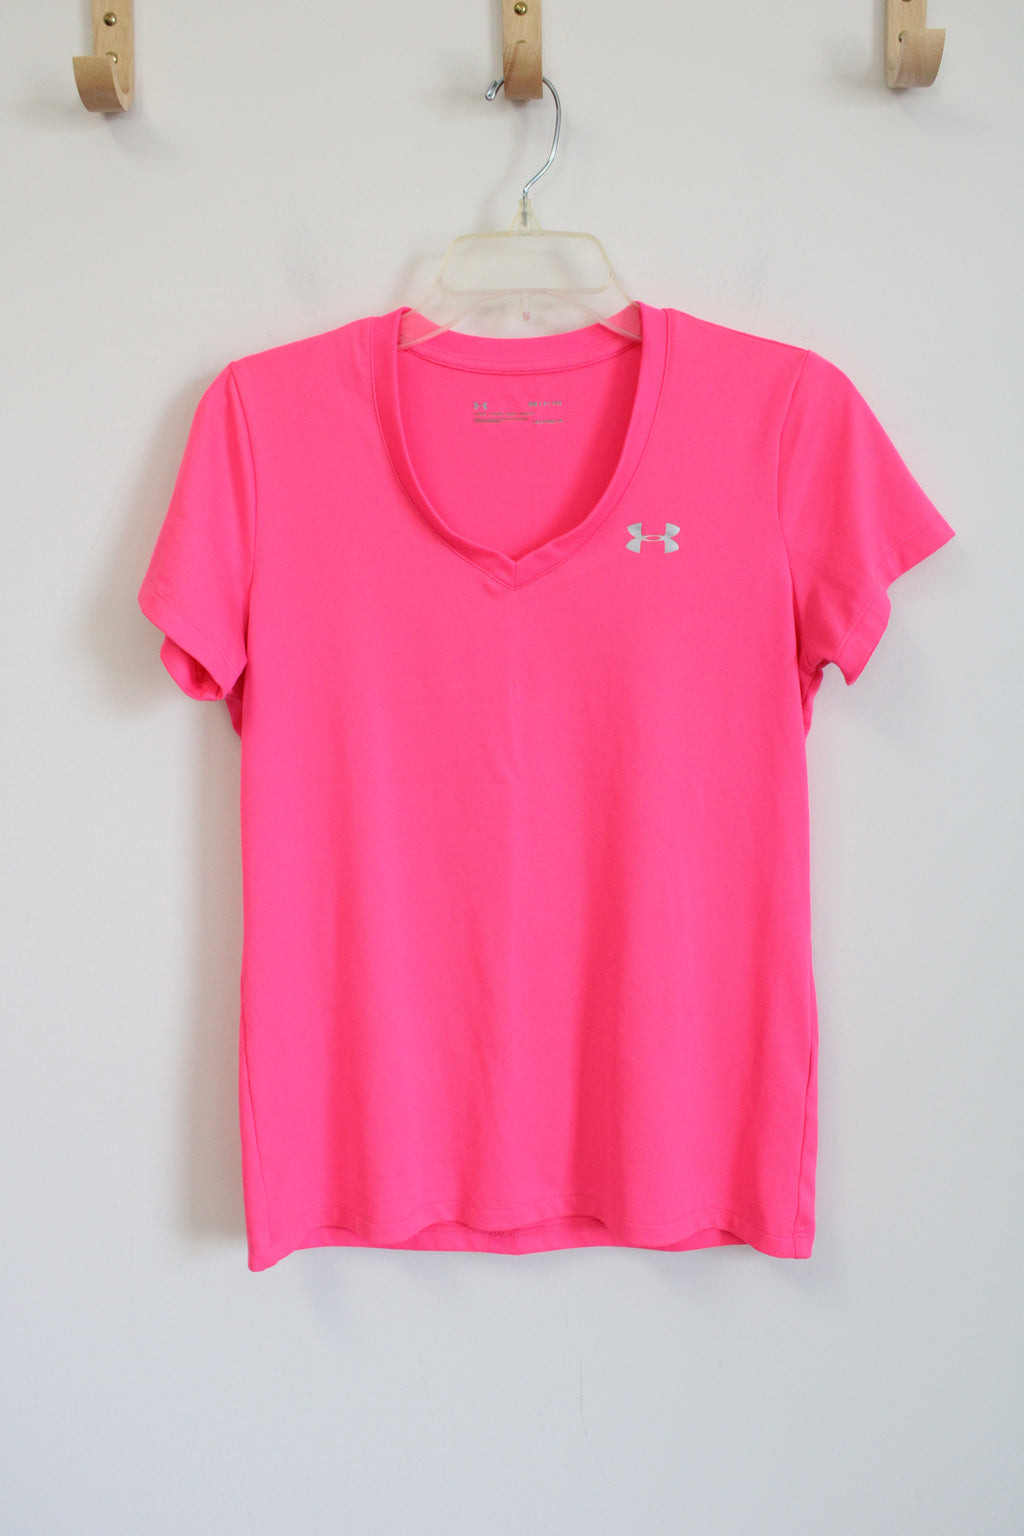 Under Armour Neon Pink Loose Fit Shirt | S